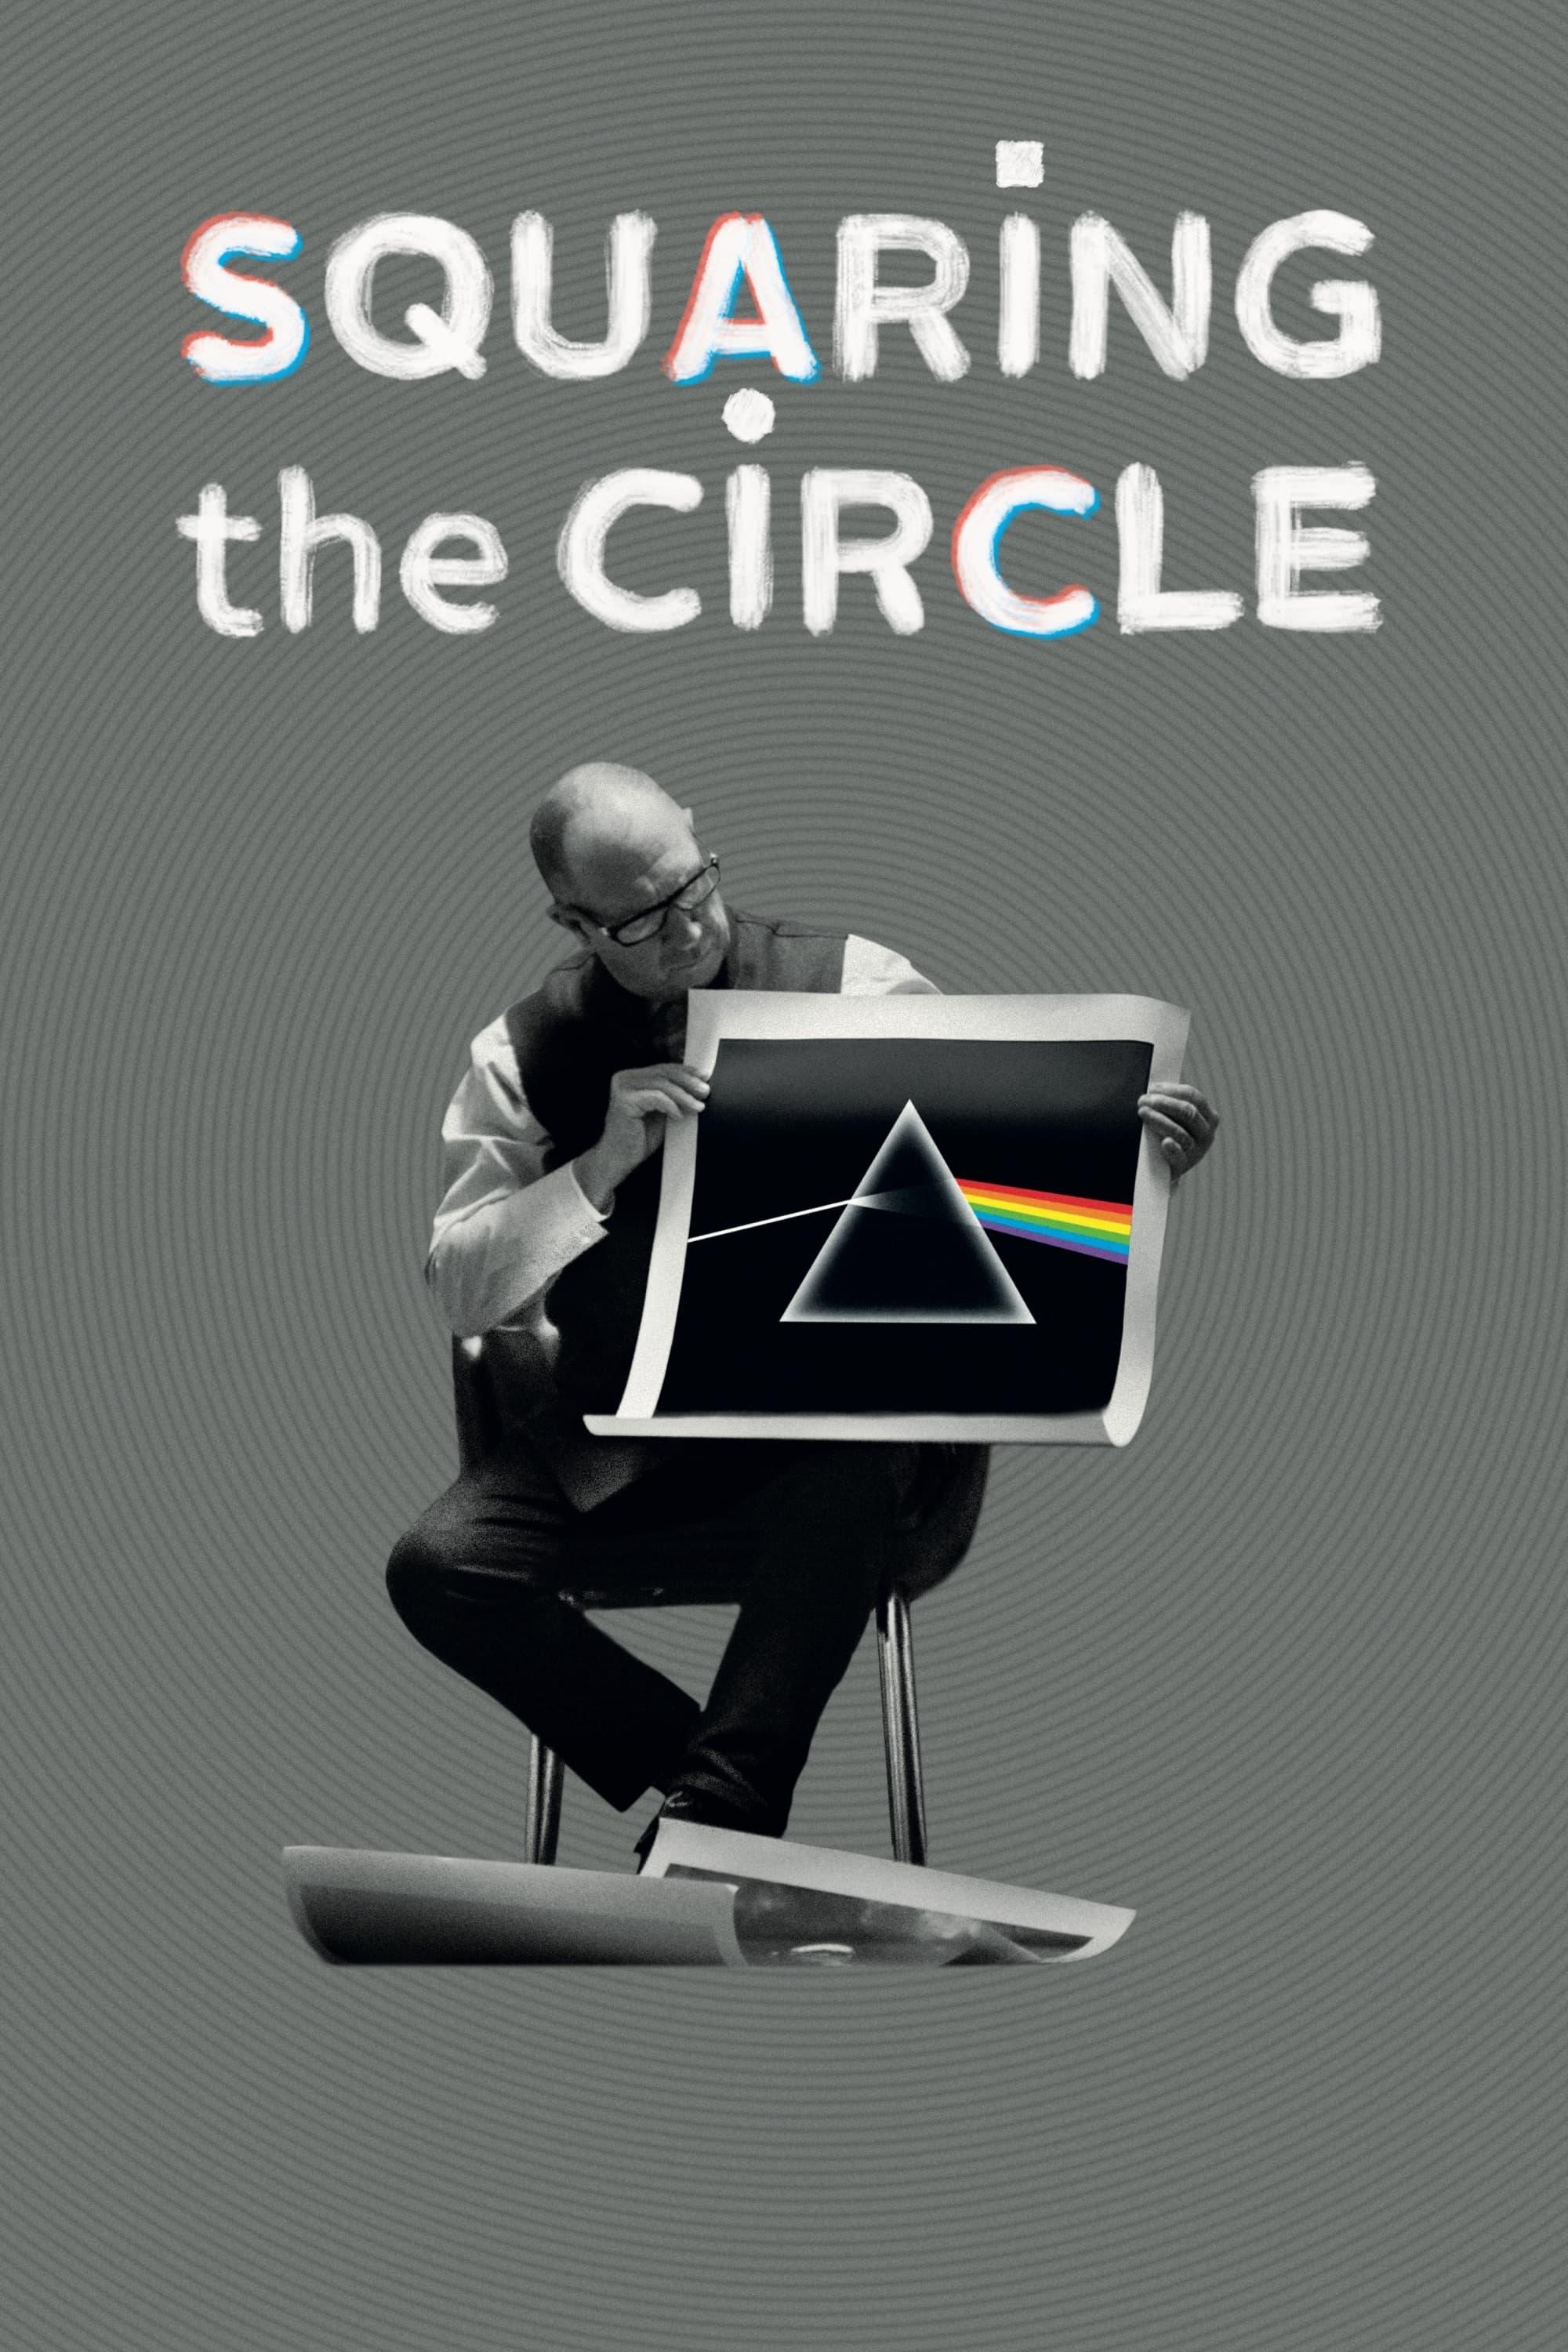 Squaring the Circle (The Story of Hipgnosis) poster